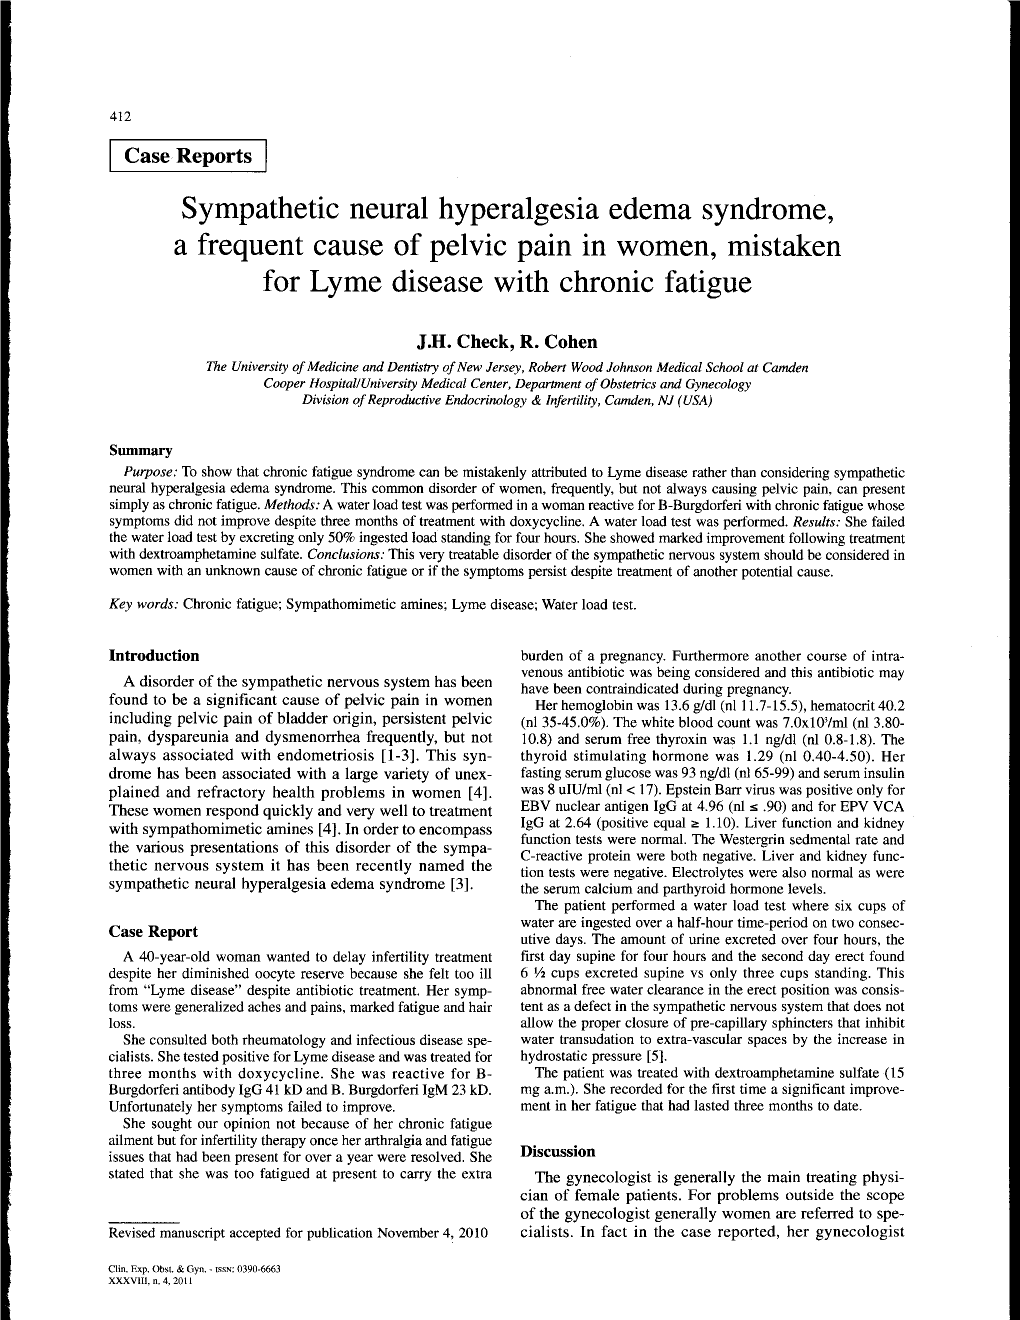 Sympathetic Neural Hyperalgesia Edema Syndrome, a Frequent Cause of Pelvic Pain in Women, Mistaken for Lyme Disease with Chronic Fatigue